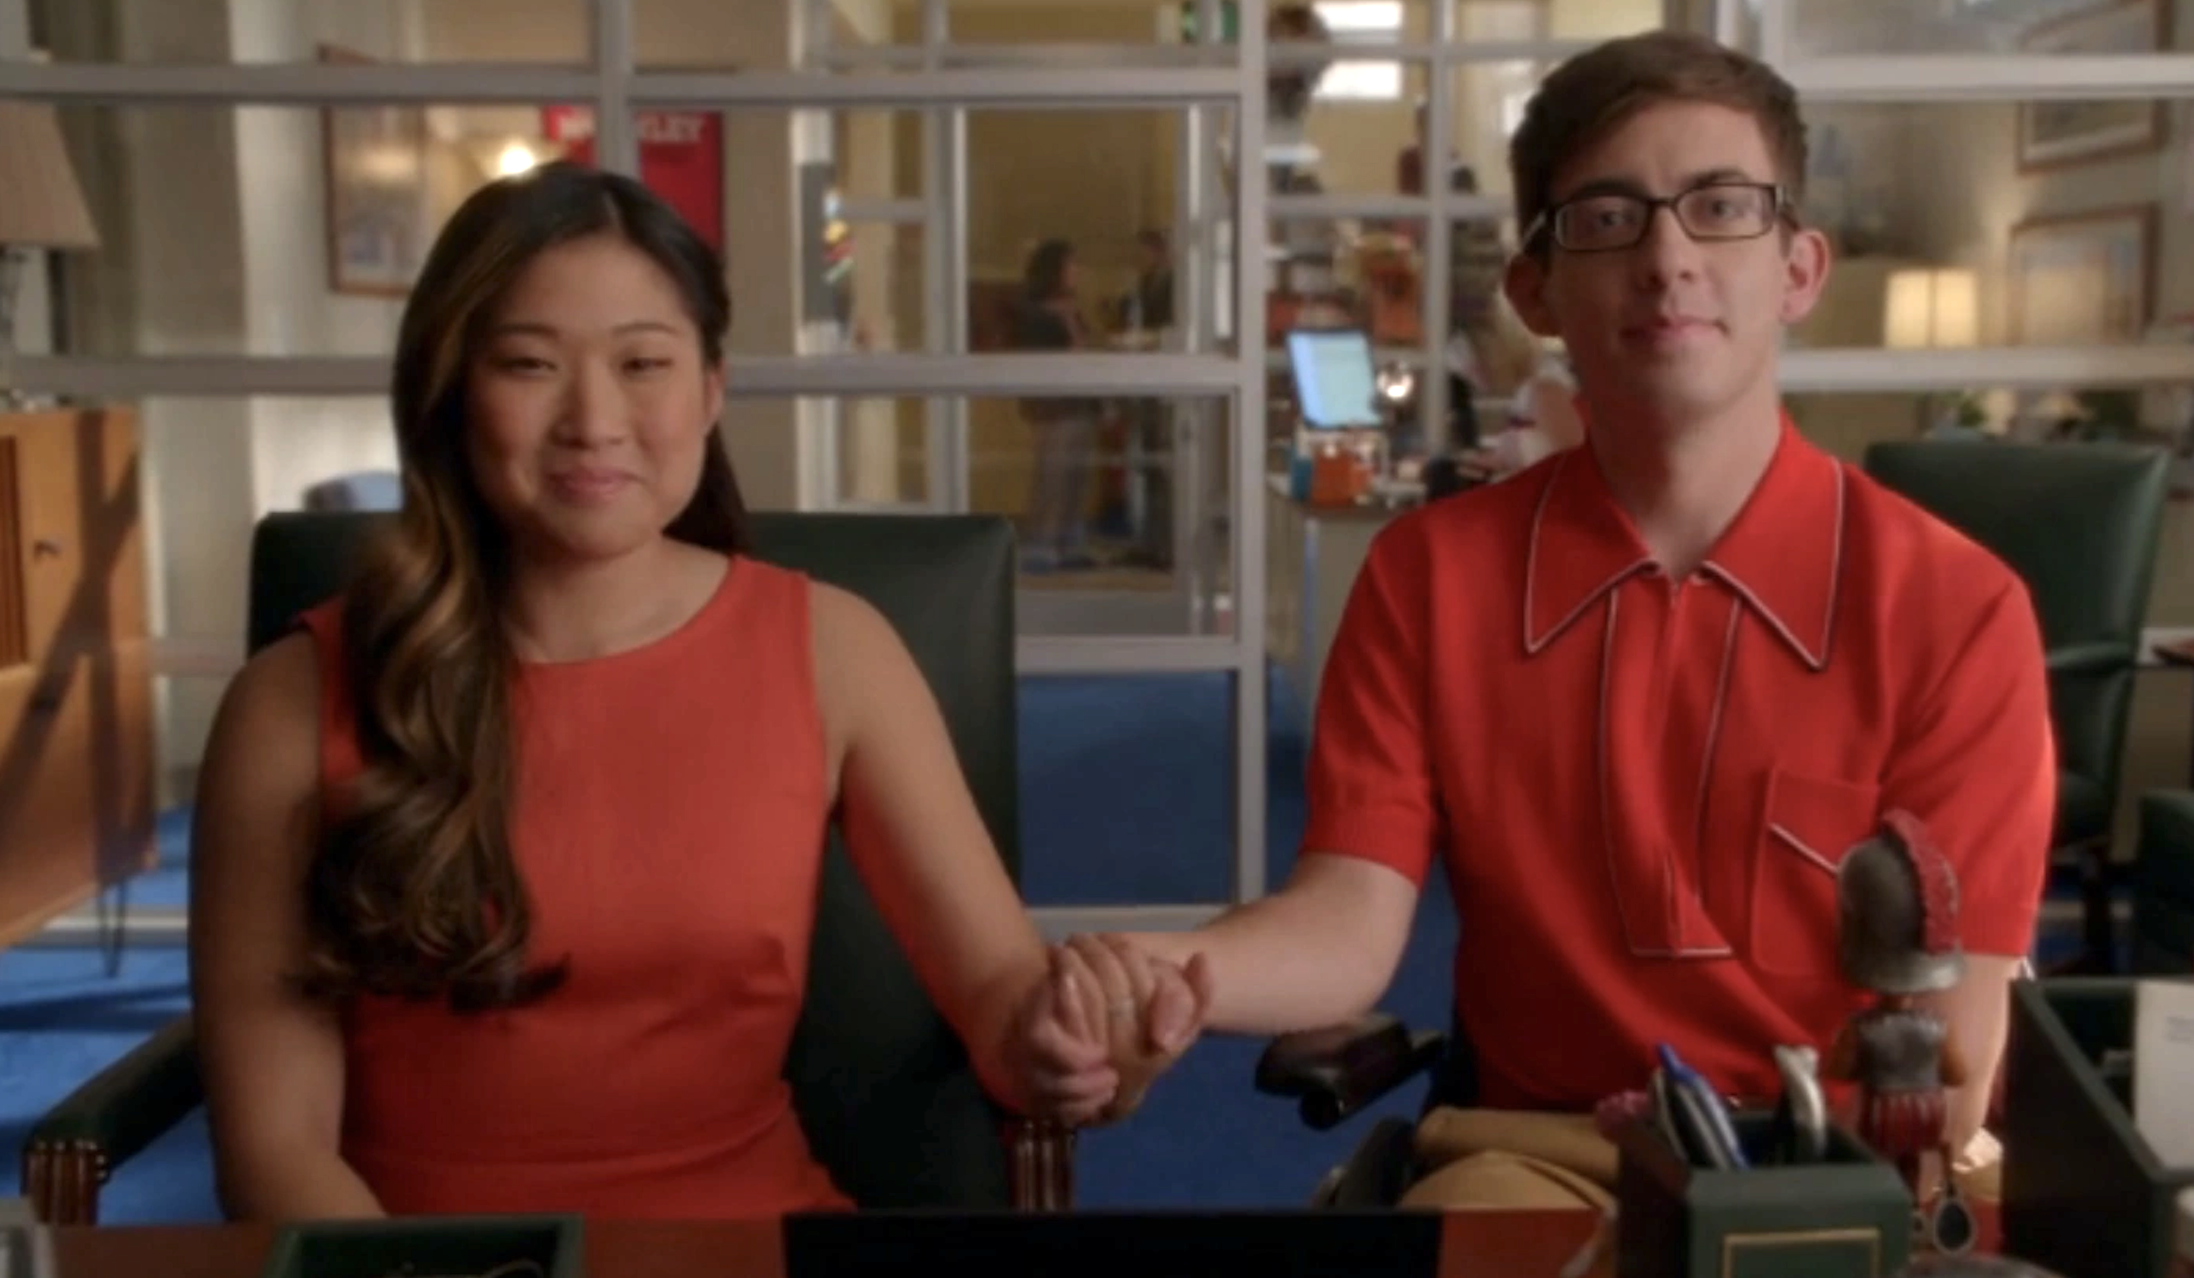 Tina and Artie sitting in a school office holding hands